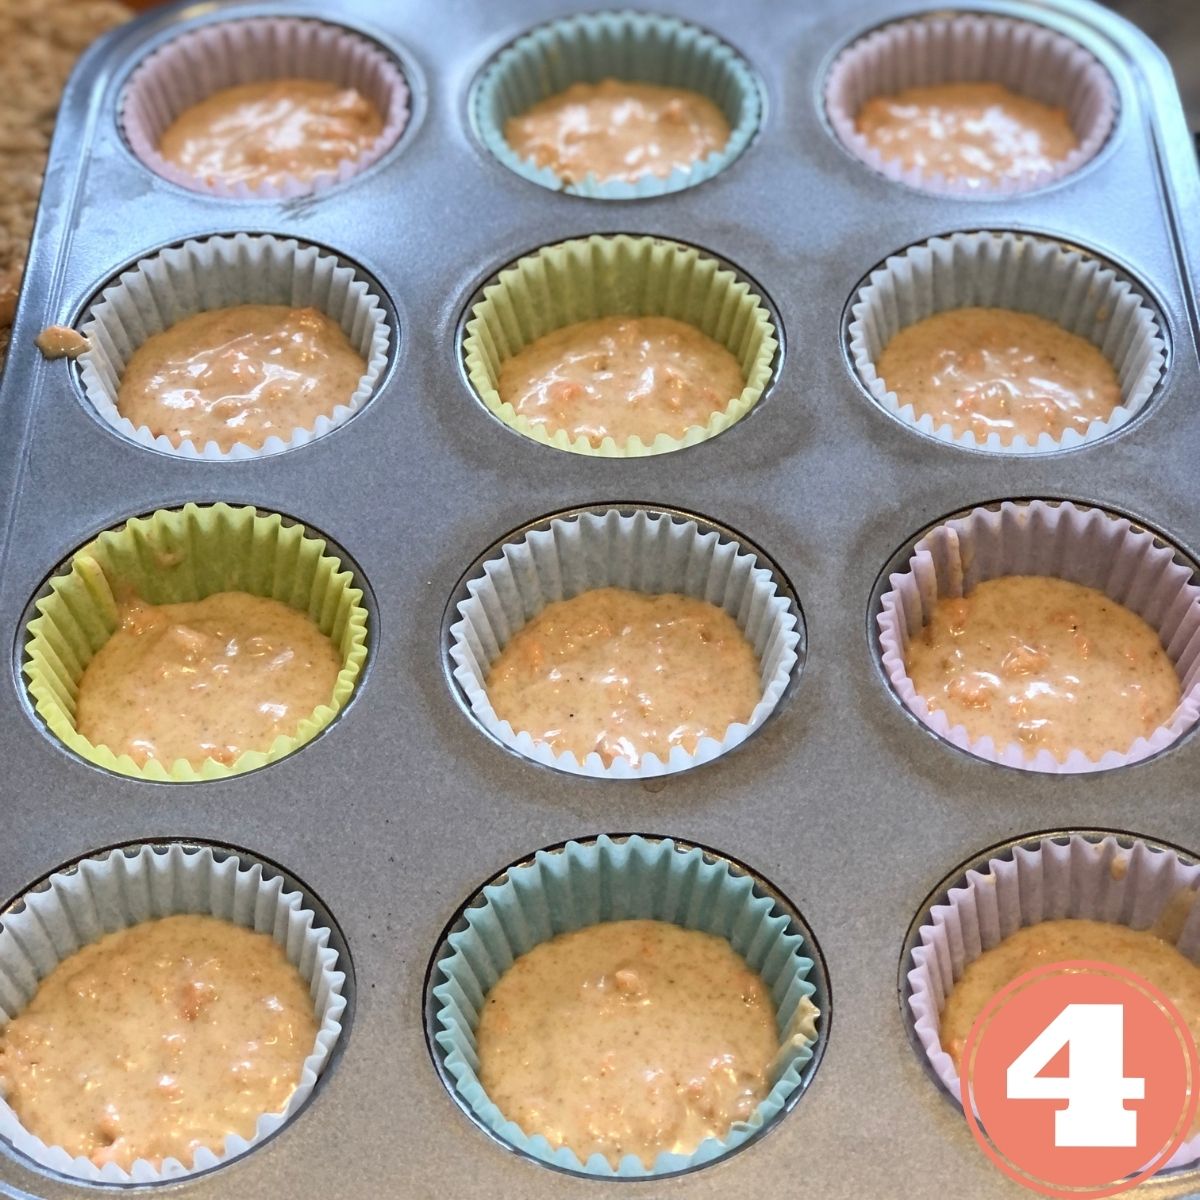 Carrot cake muffin batter in a paper muffin liners in a muffin baking pan